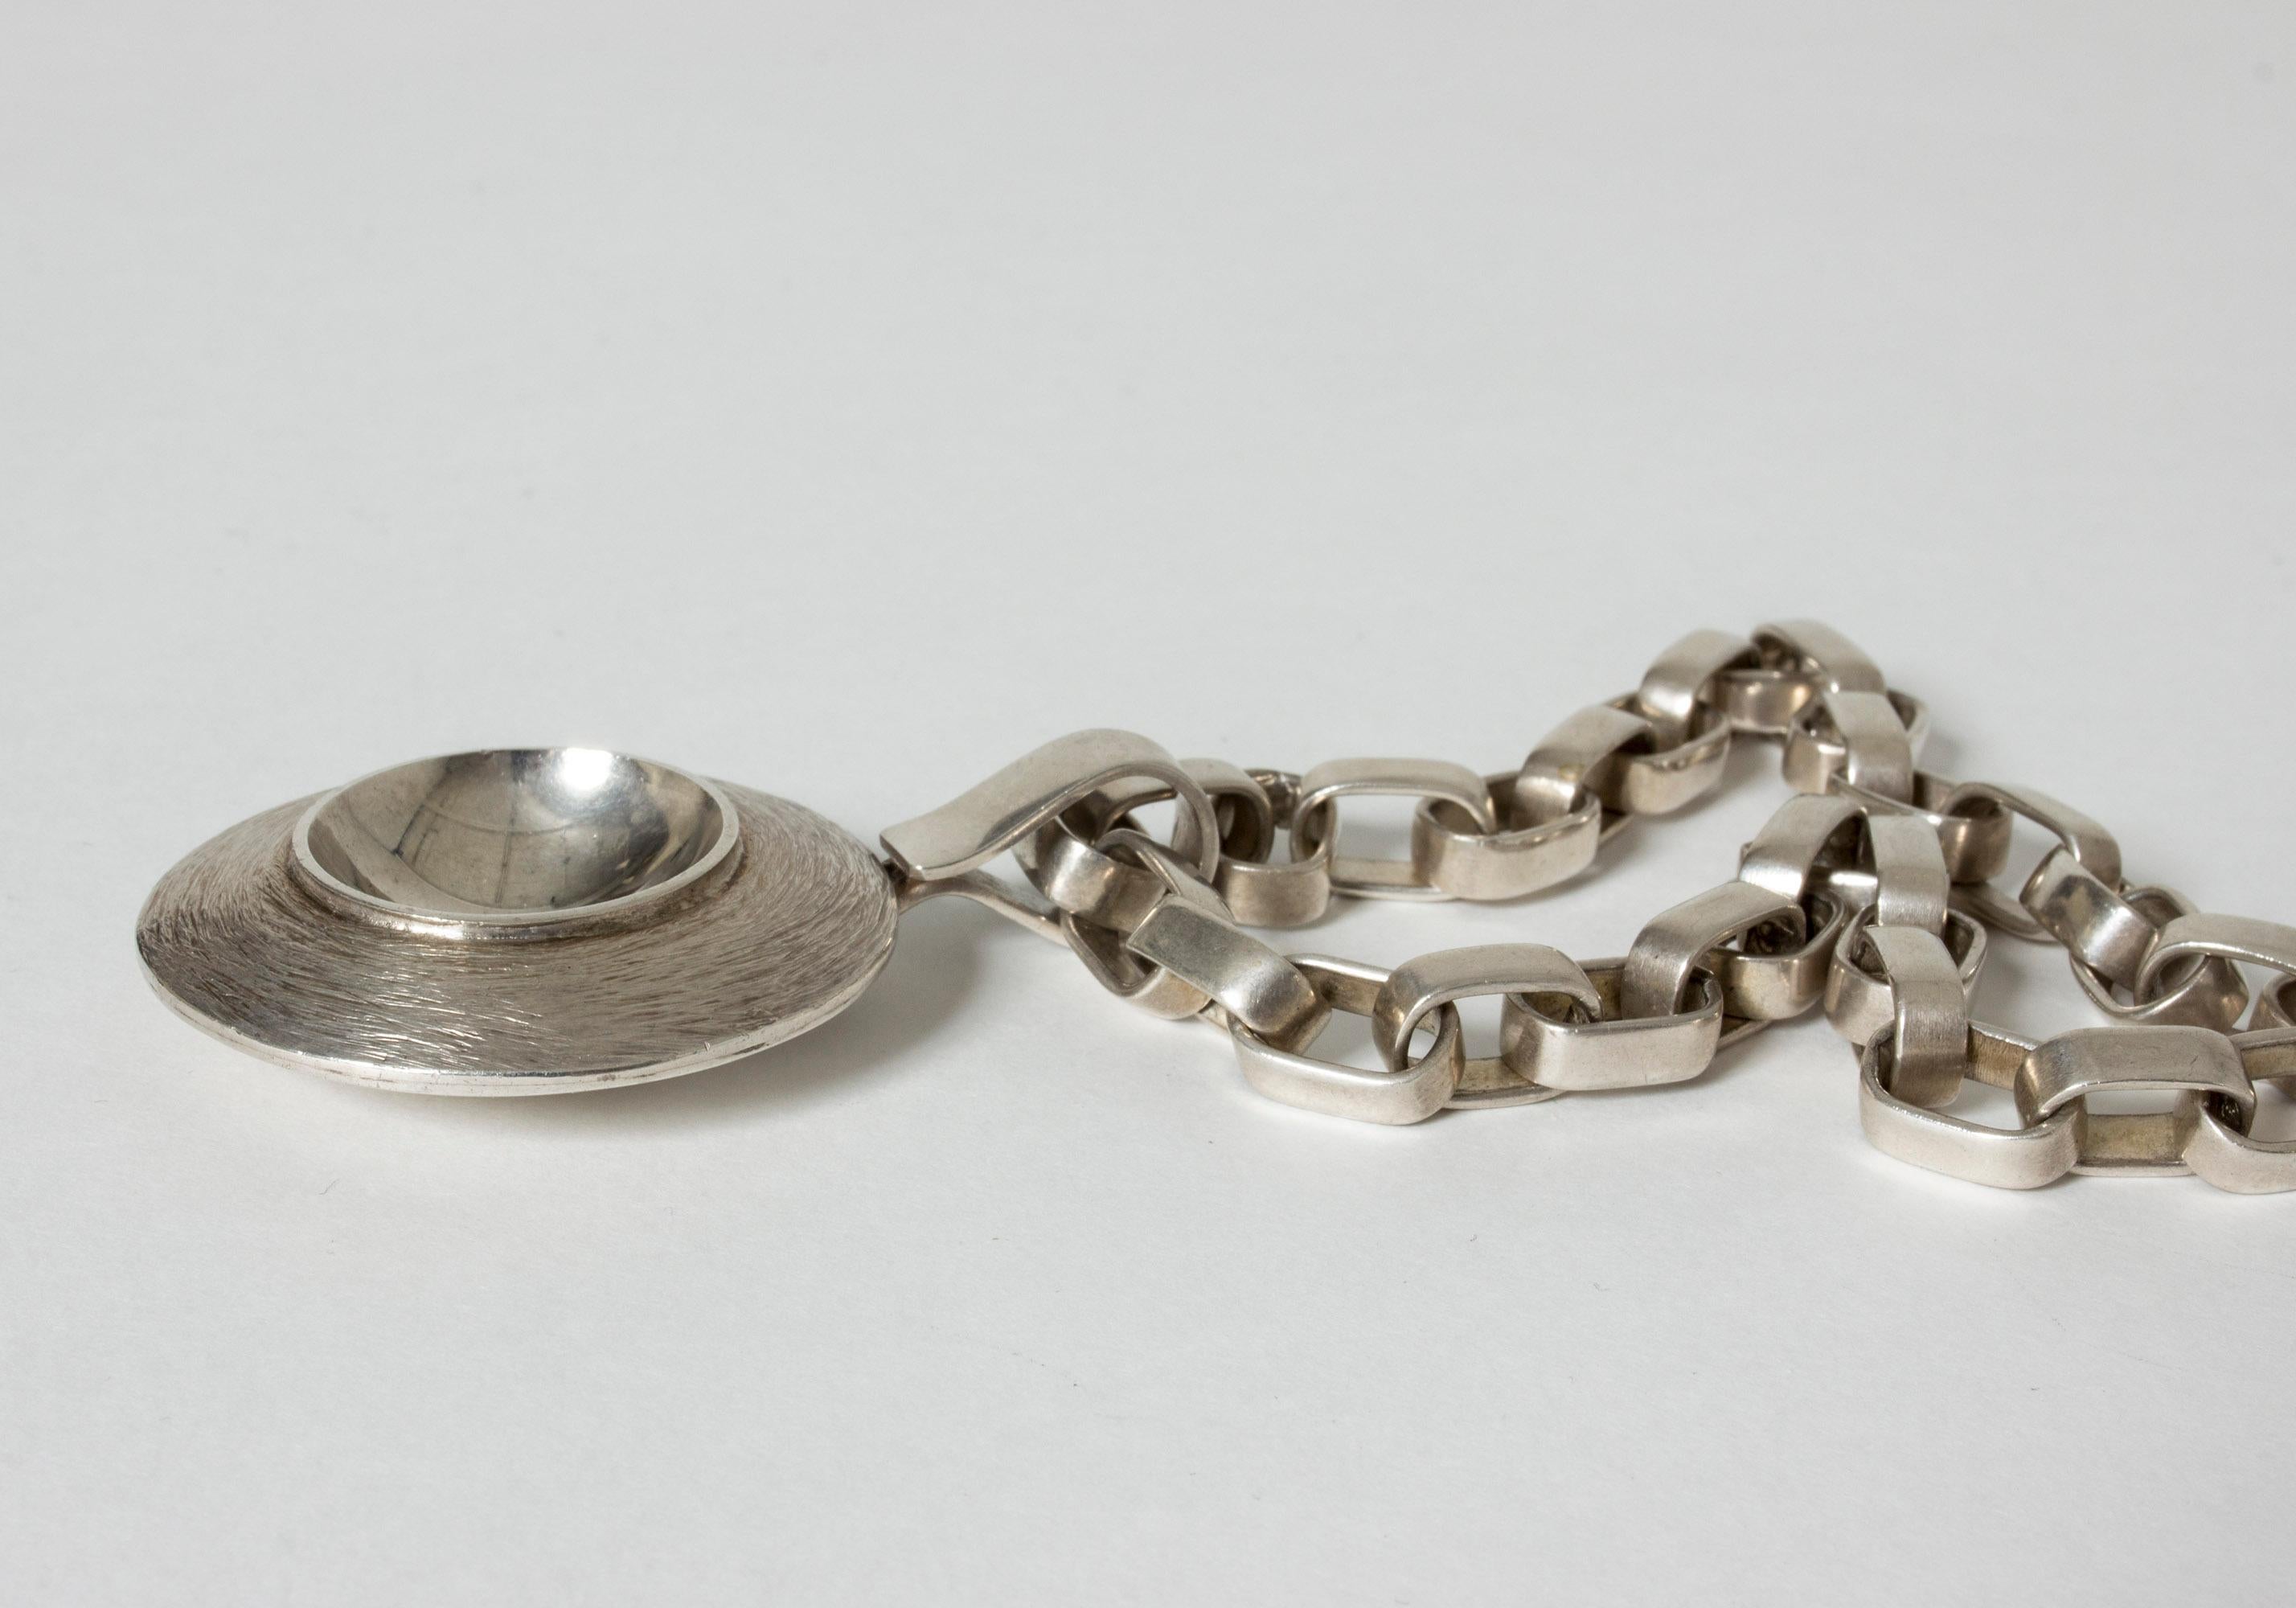 Magnificent silver necklace by Sven-Erik Högberg with a hypnotizing, round pendant on a thick chain that can be worn just as well on its own. Wonderful design and craftsmanship.

Year: 1974 (pendant) and 1978 (chain)
Dimensions: Height 6.5 cm